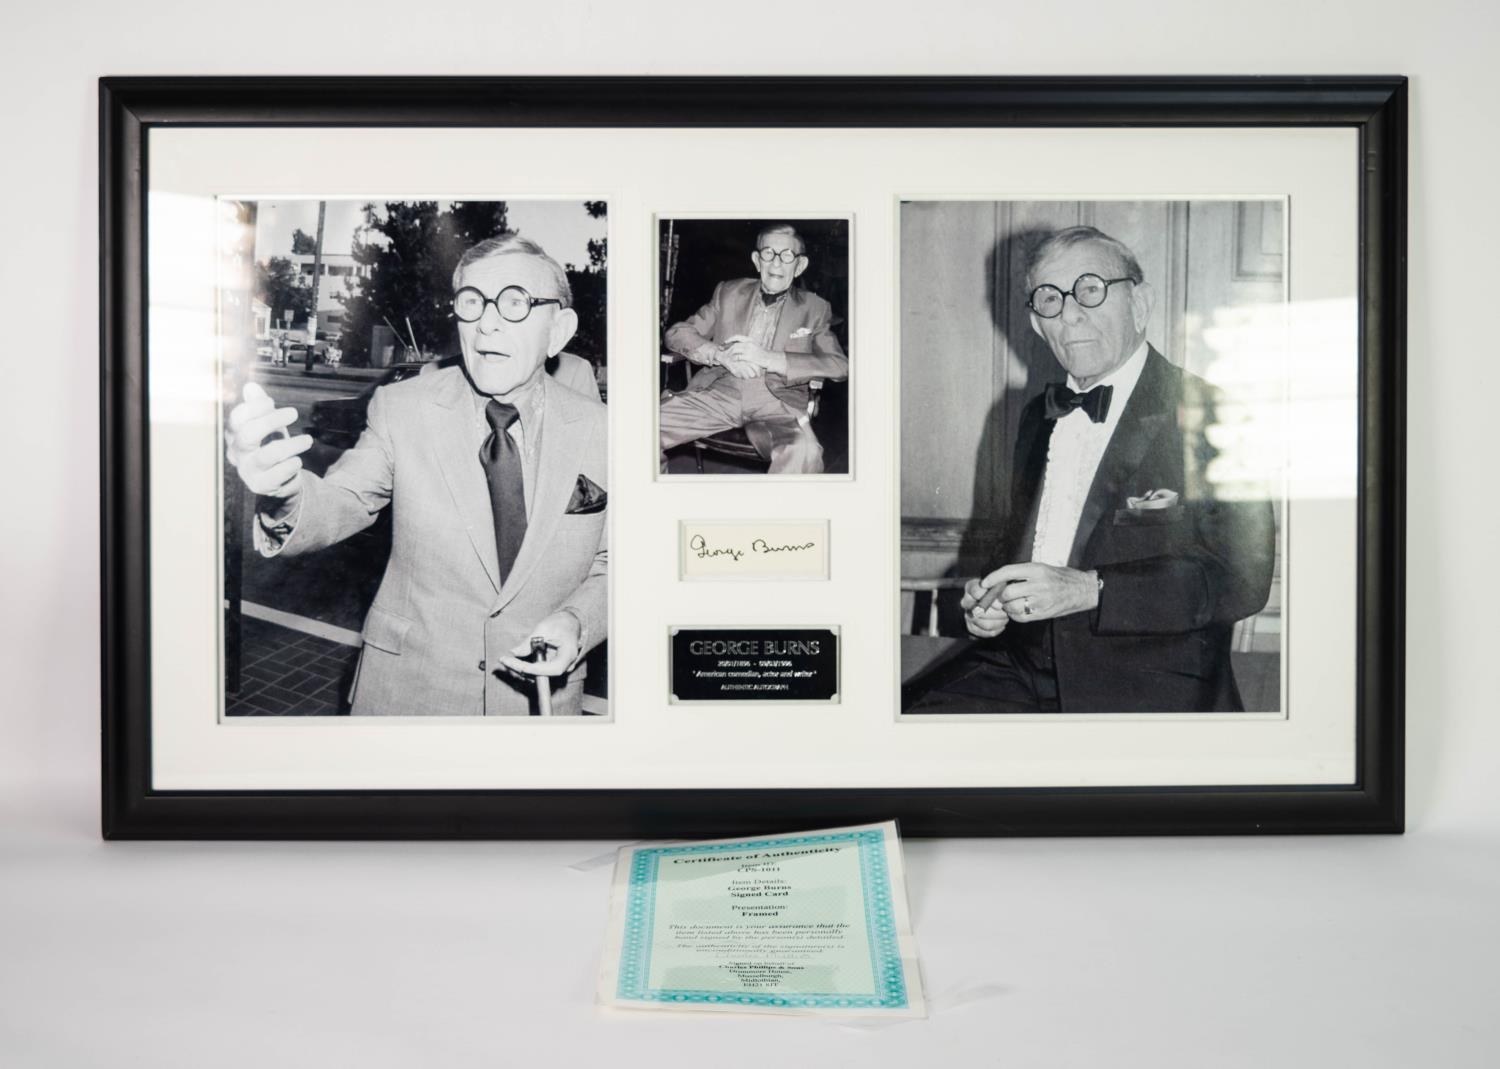 GEORGE BURNS - AMERICAN COMEDIAN AND ACTOR AUTOGRAPH ON WHITE CARD, mounted as montage with three